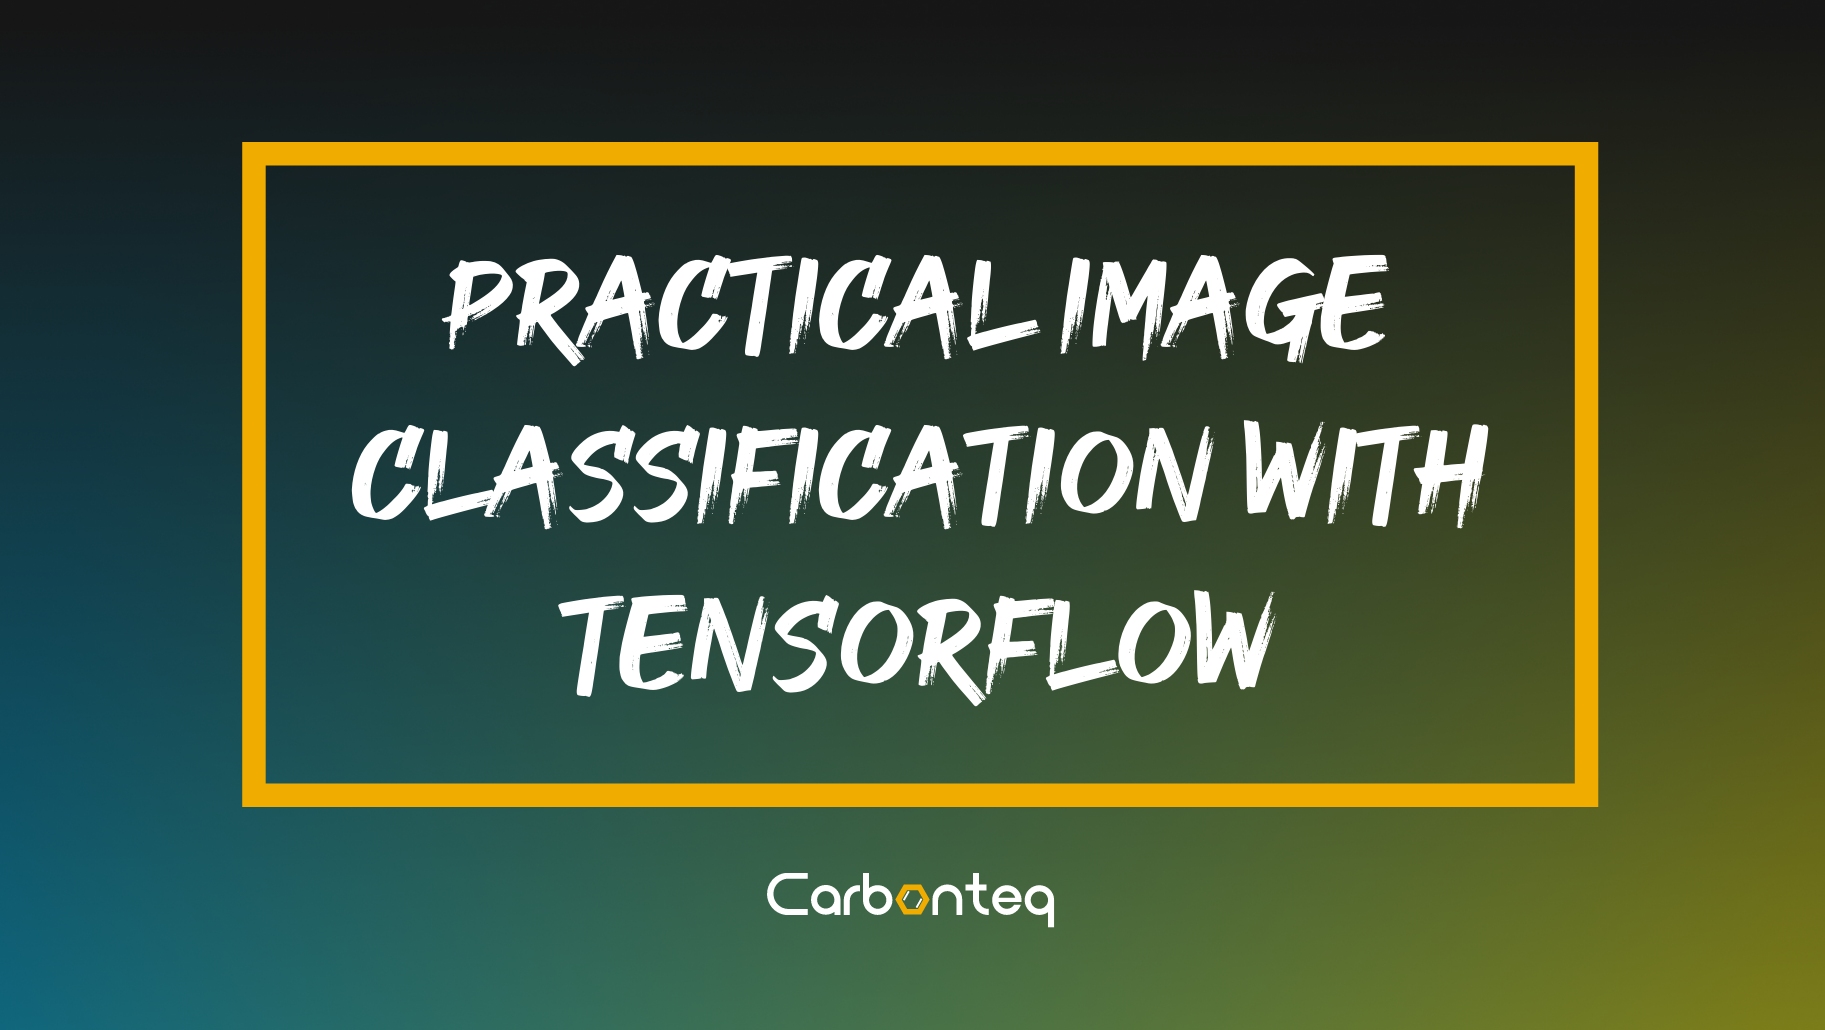 Practical Image Classification with Tensorflow